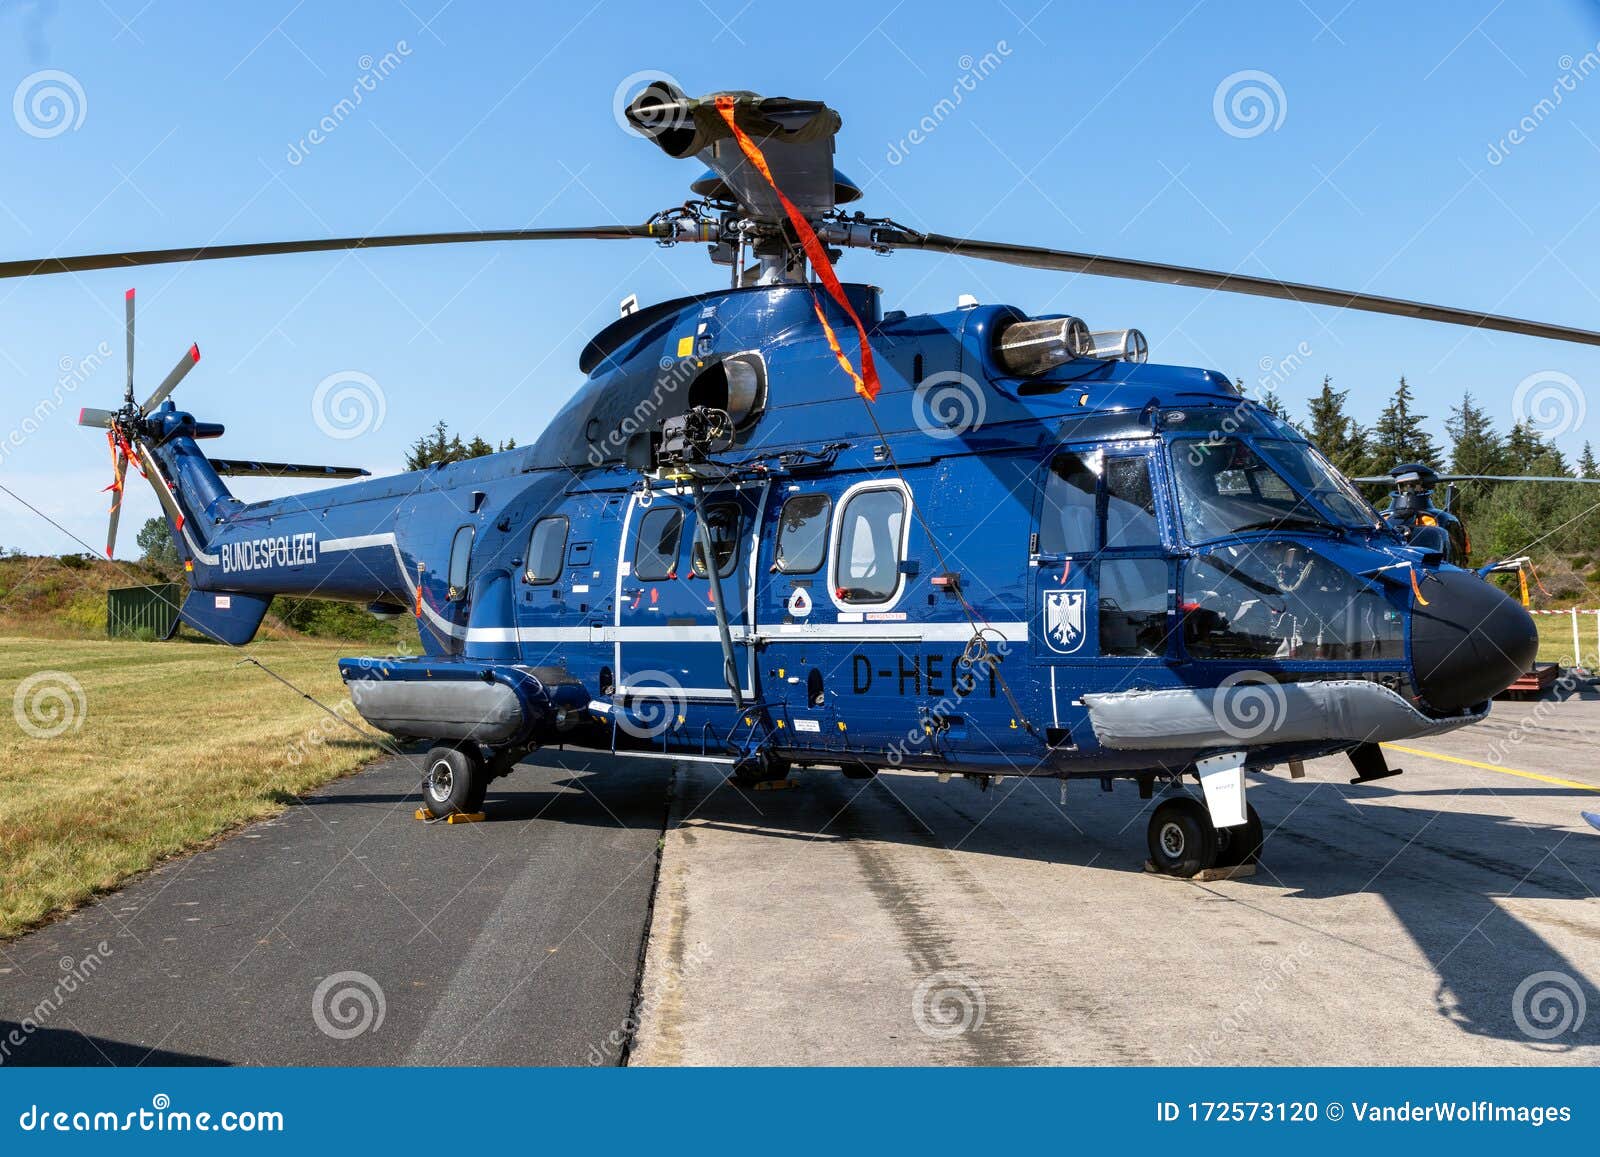 NORDHOLZ, GERMANY - JUN 14, 2019: Federal Police Bundespolizei Eurocopter L Super Puma Helicopter on the Tarmac of Editorial Image - Image of puma, enforcement: 172573120